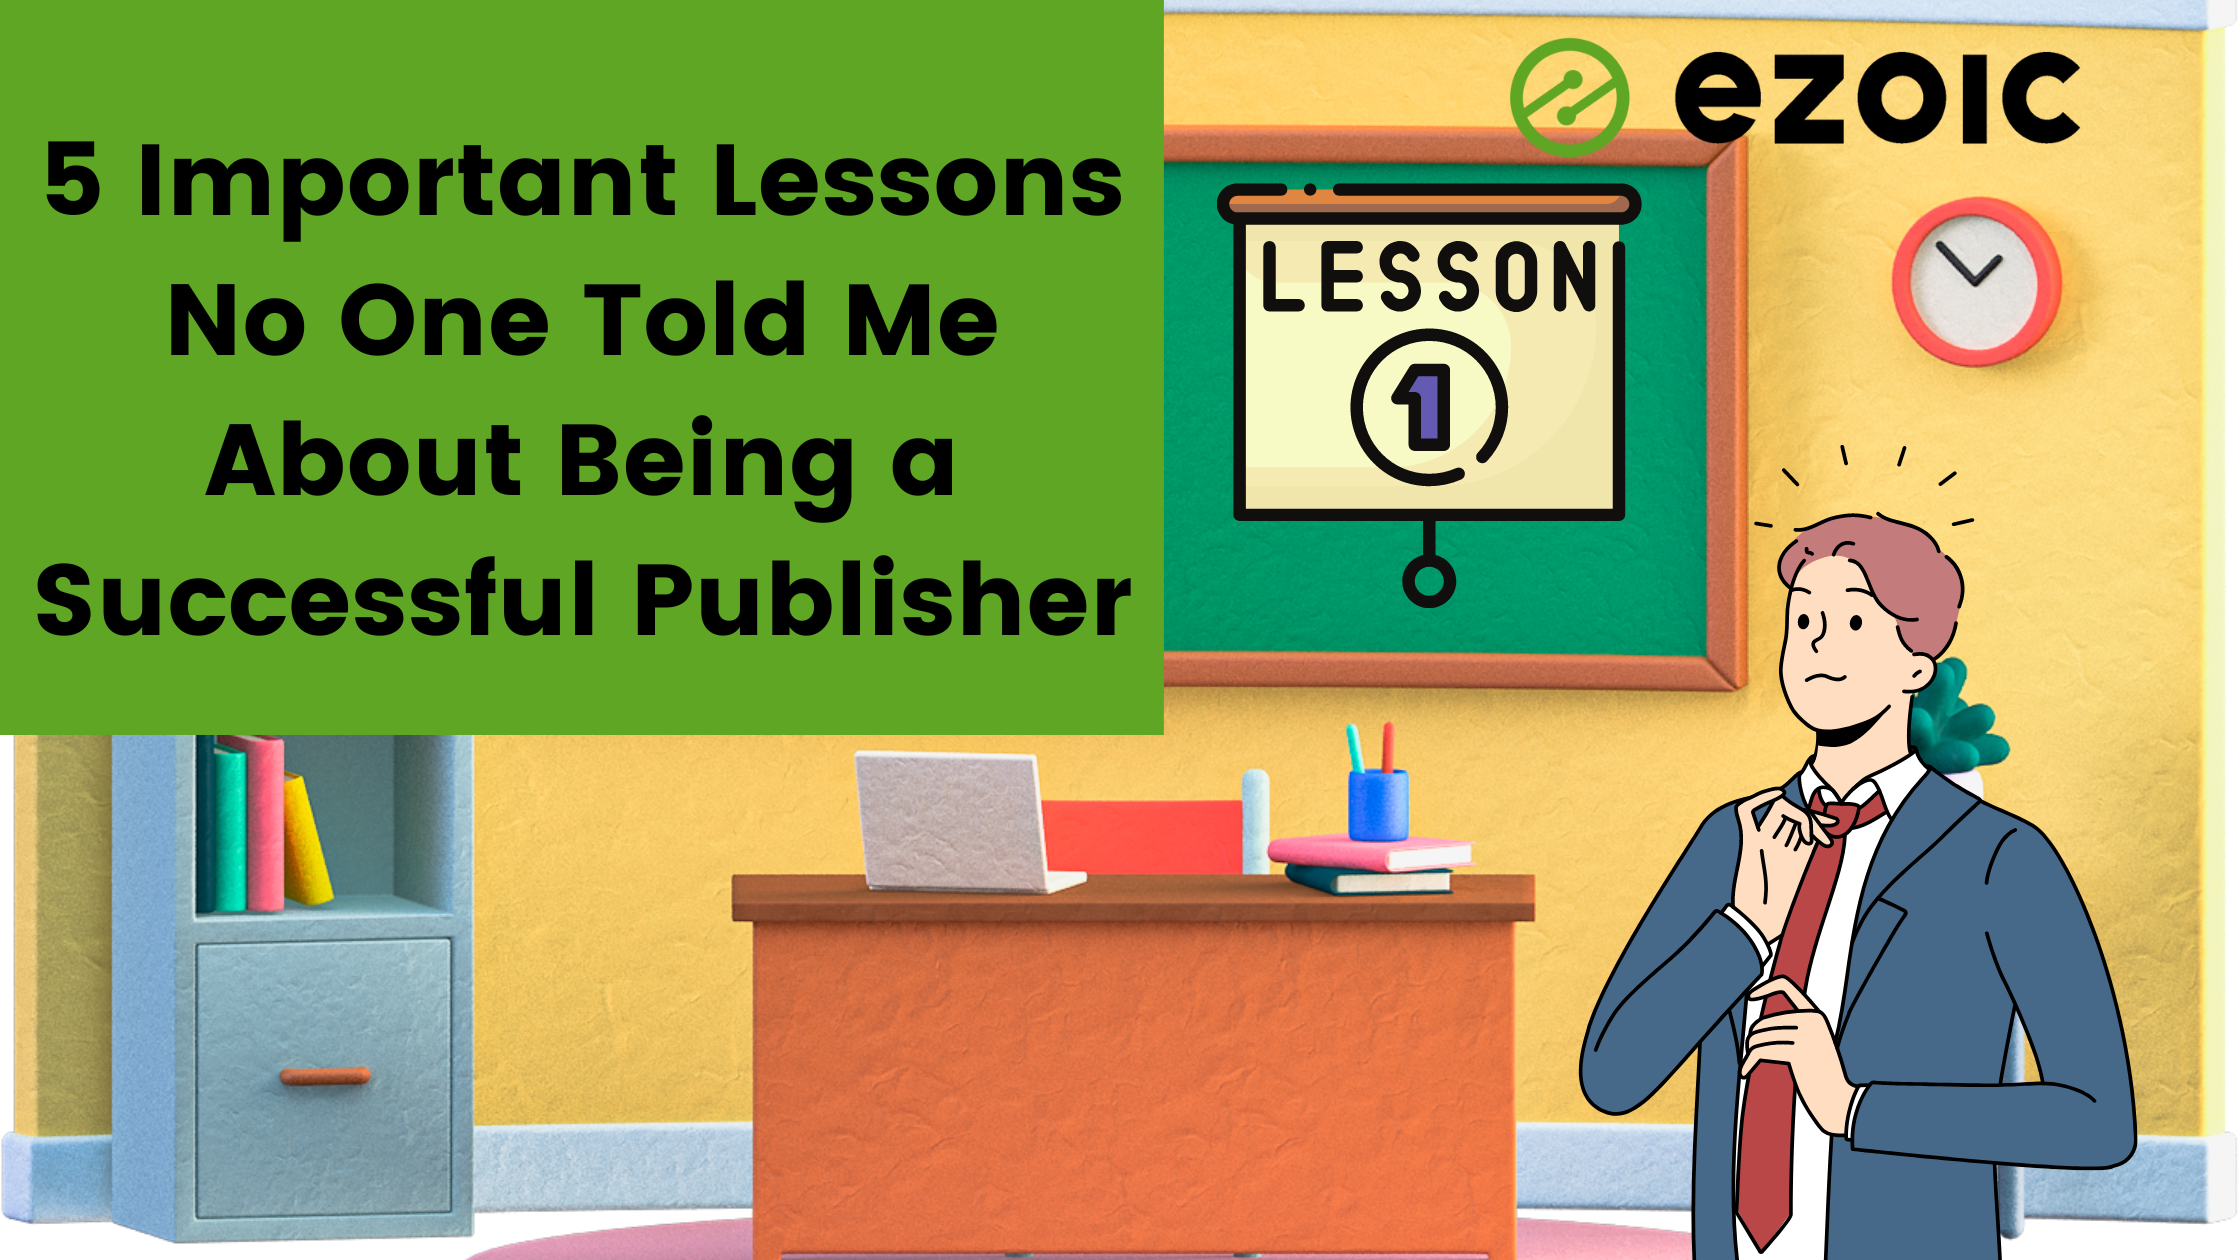 <strong>5 Important Lessons No One Told Me About Being a Successful Publisher</strong>